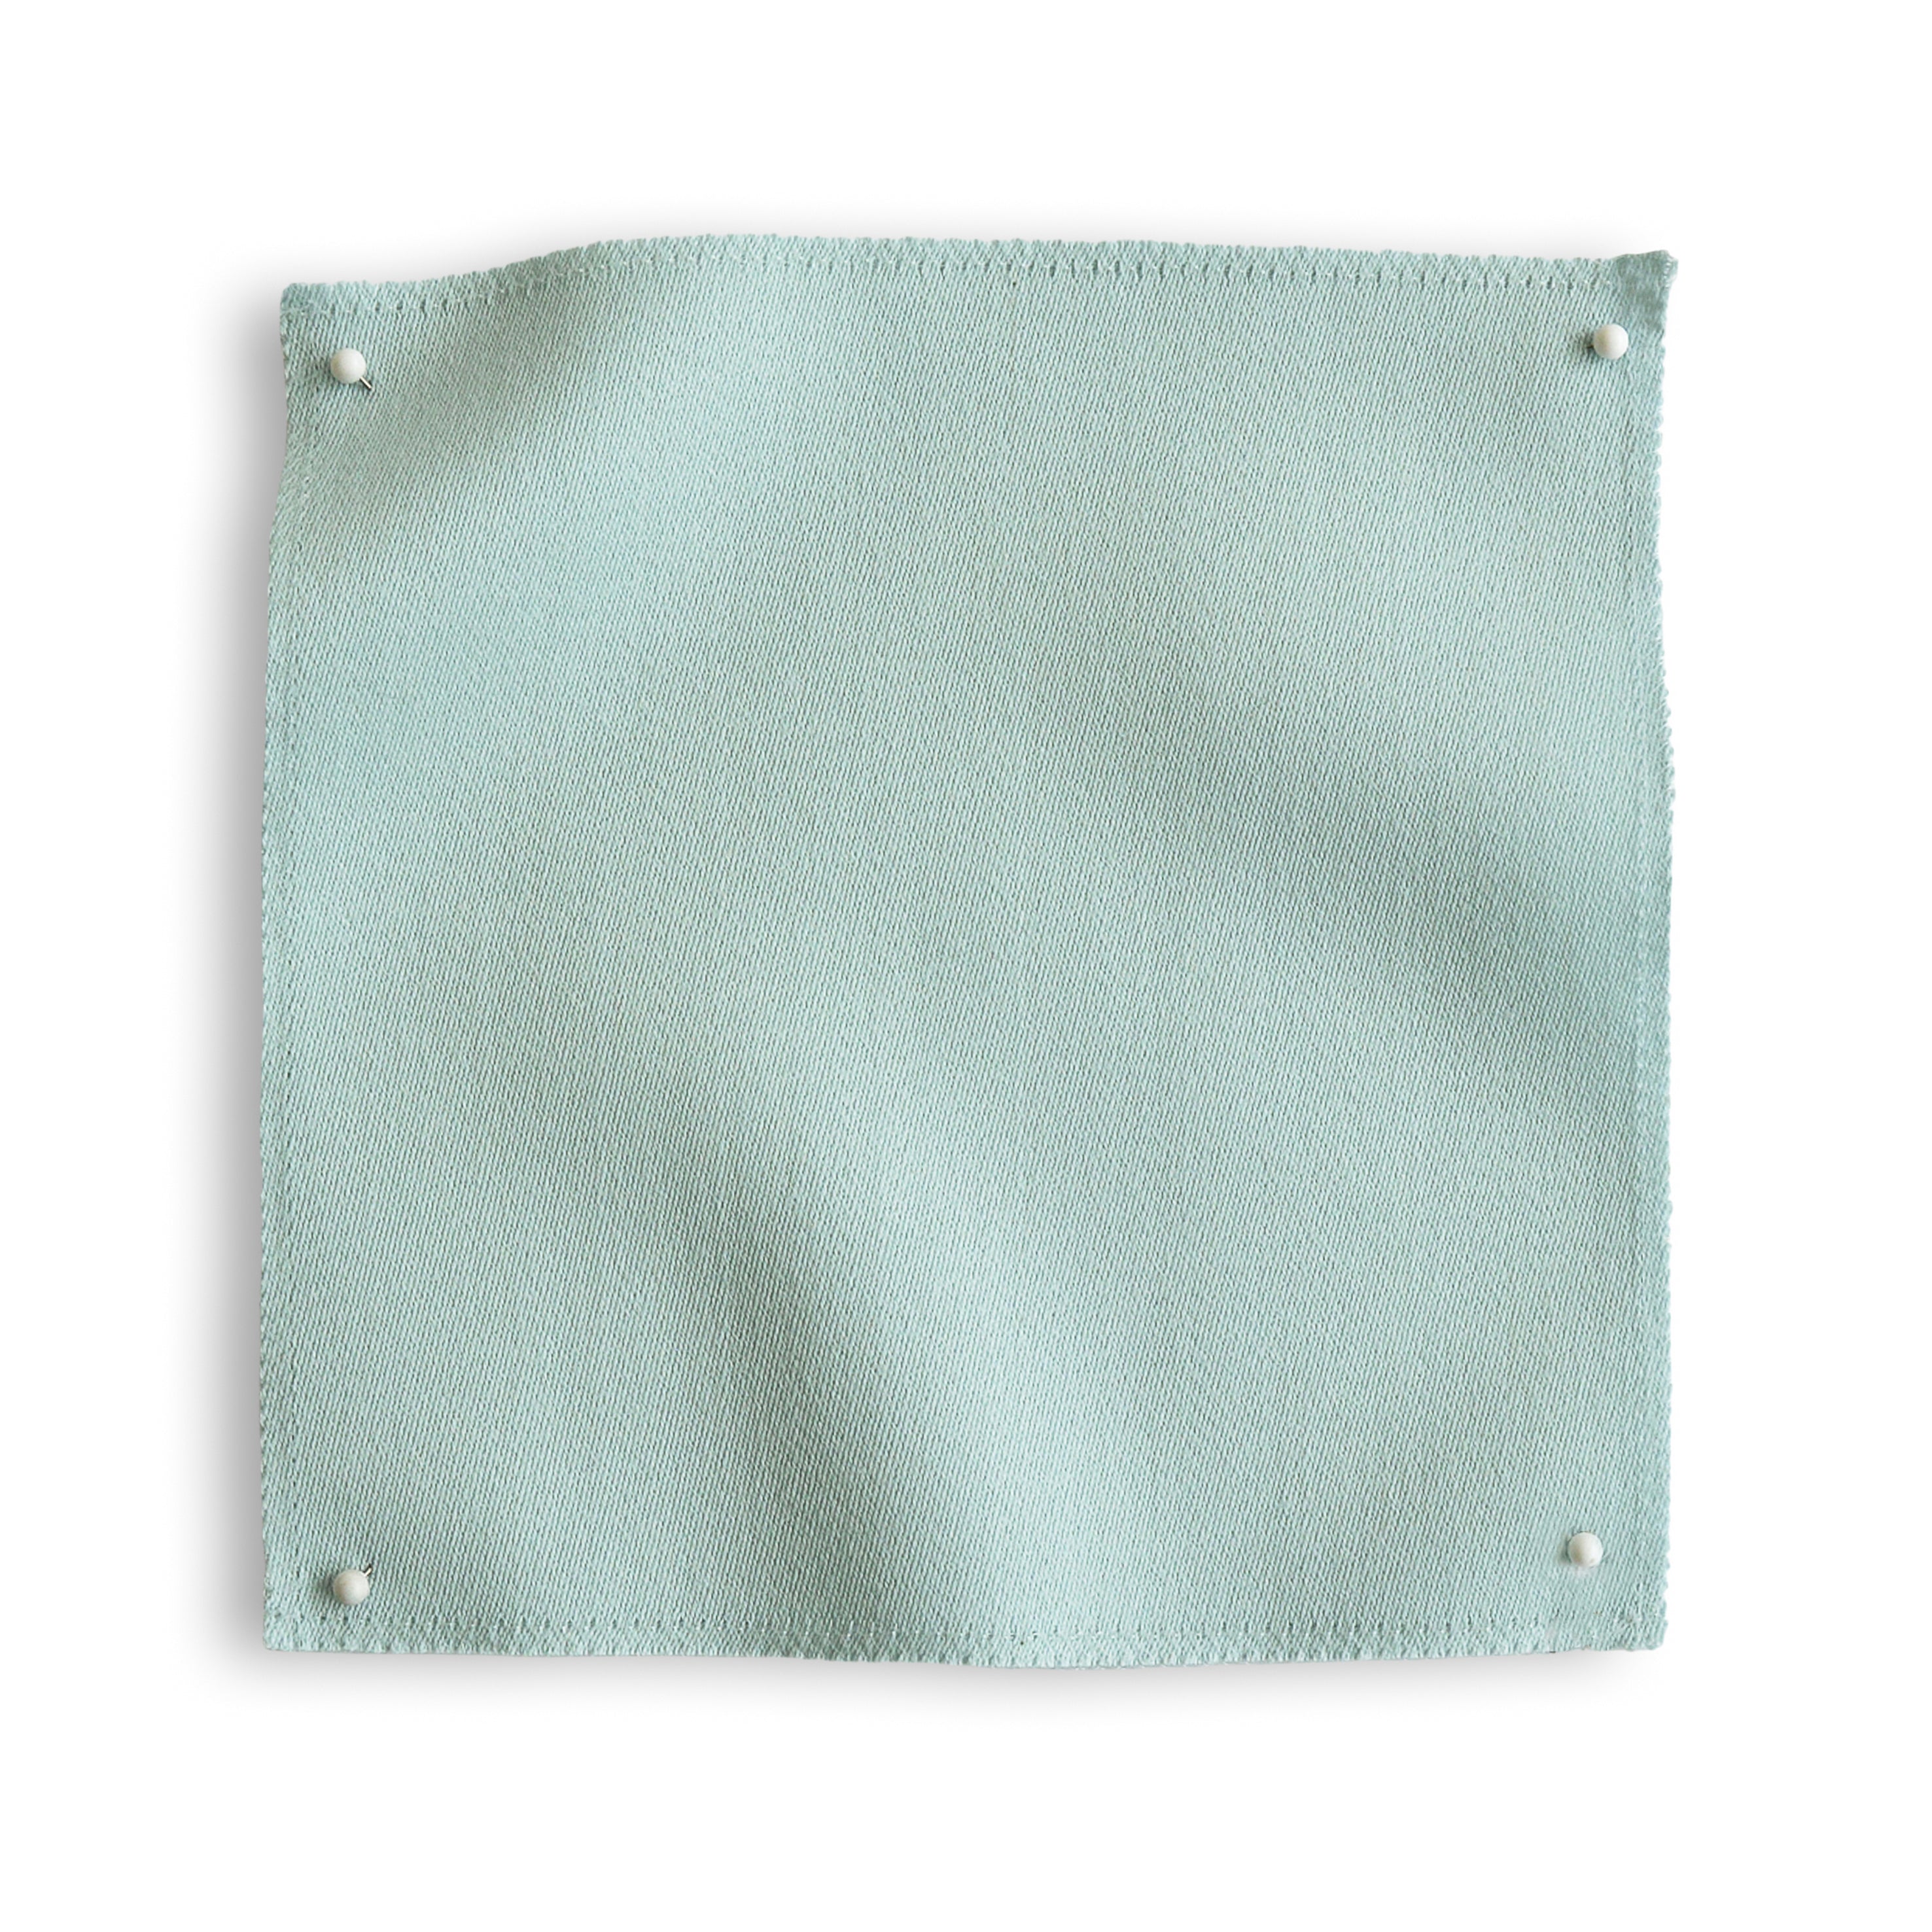 Wool sateen swatch pinned in all corners in icy blue